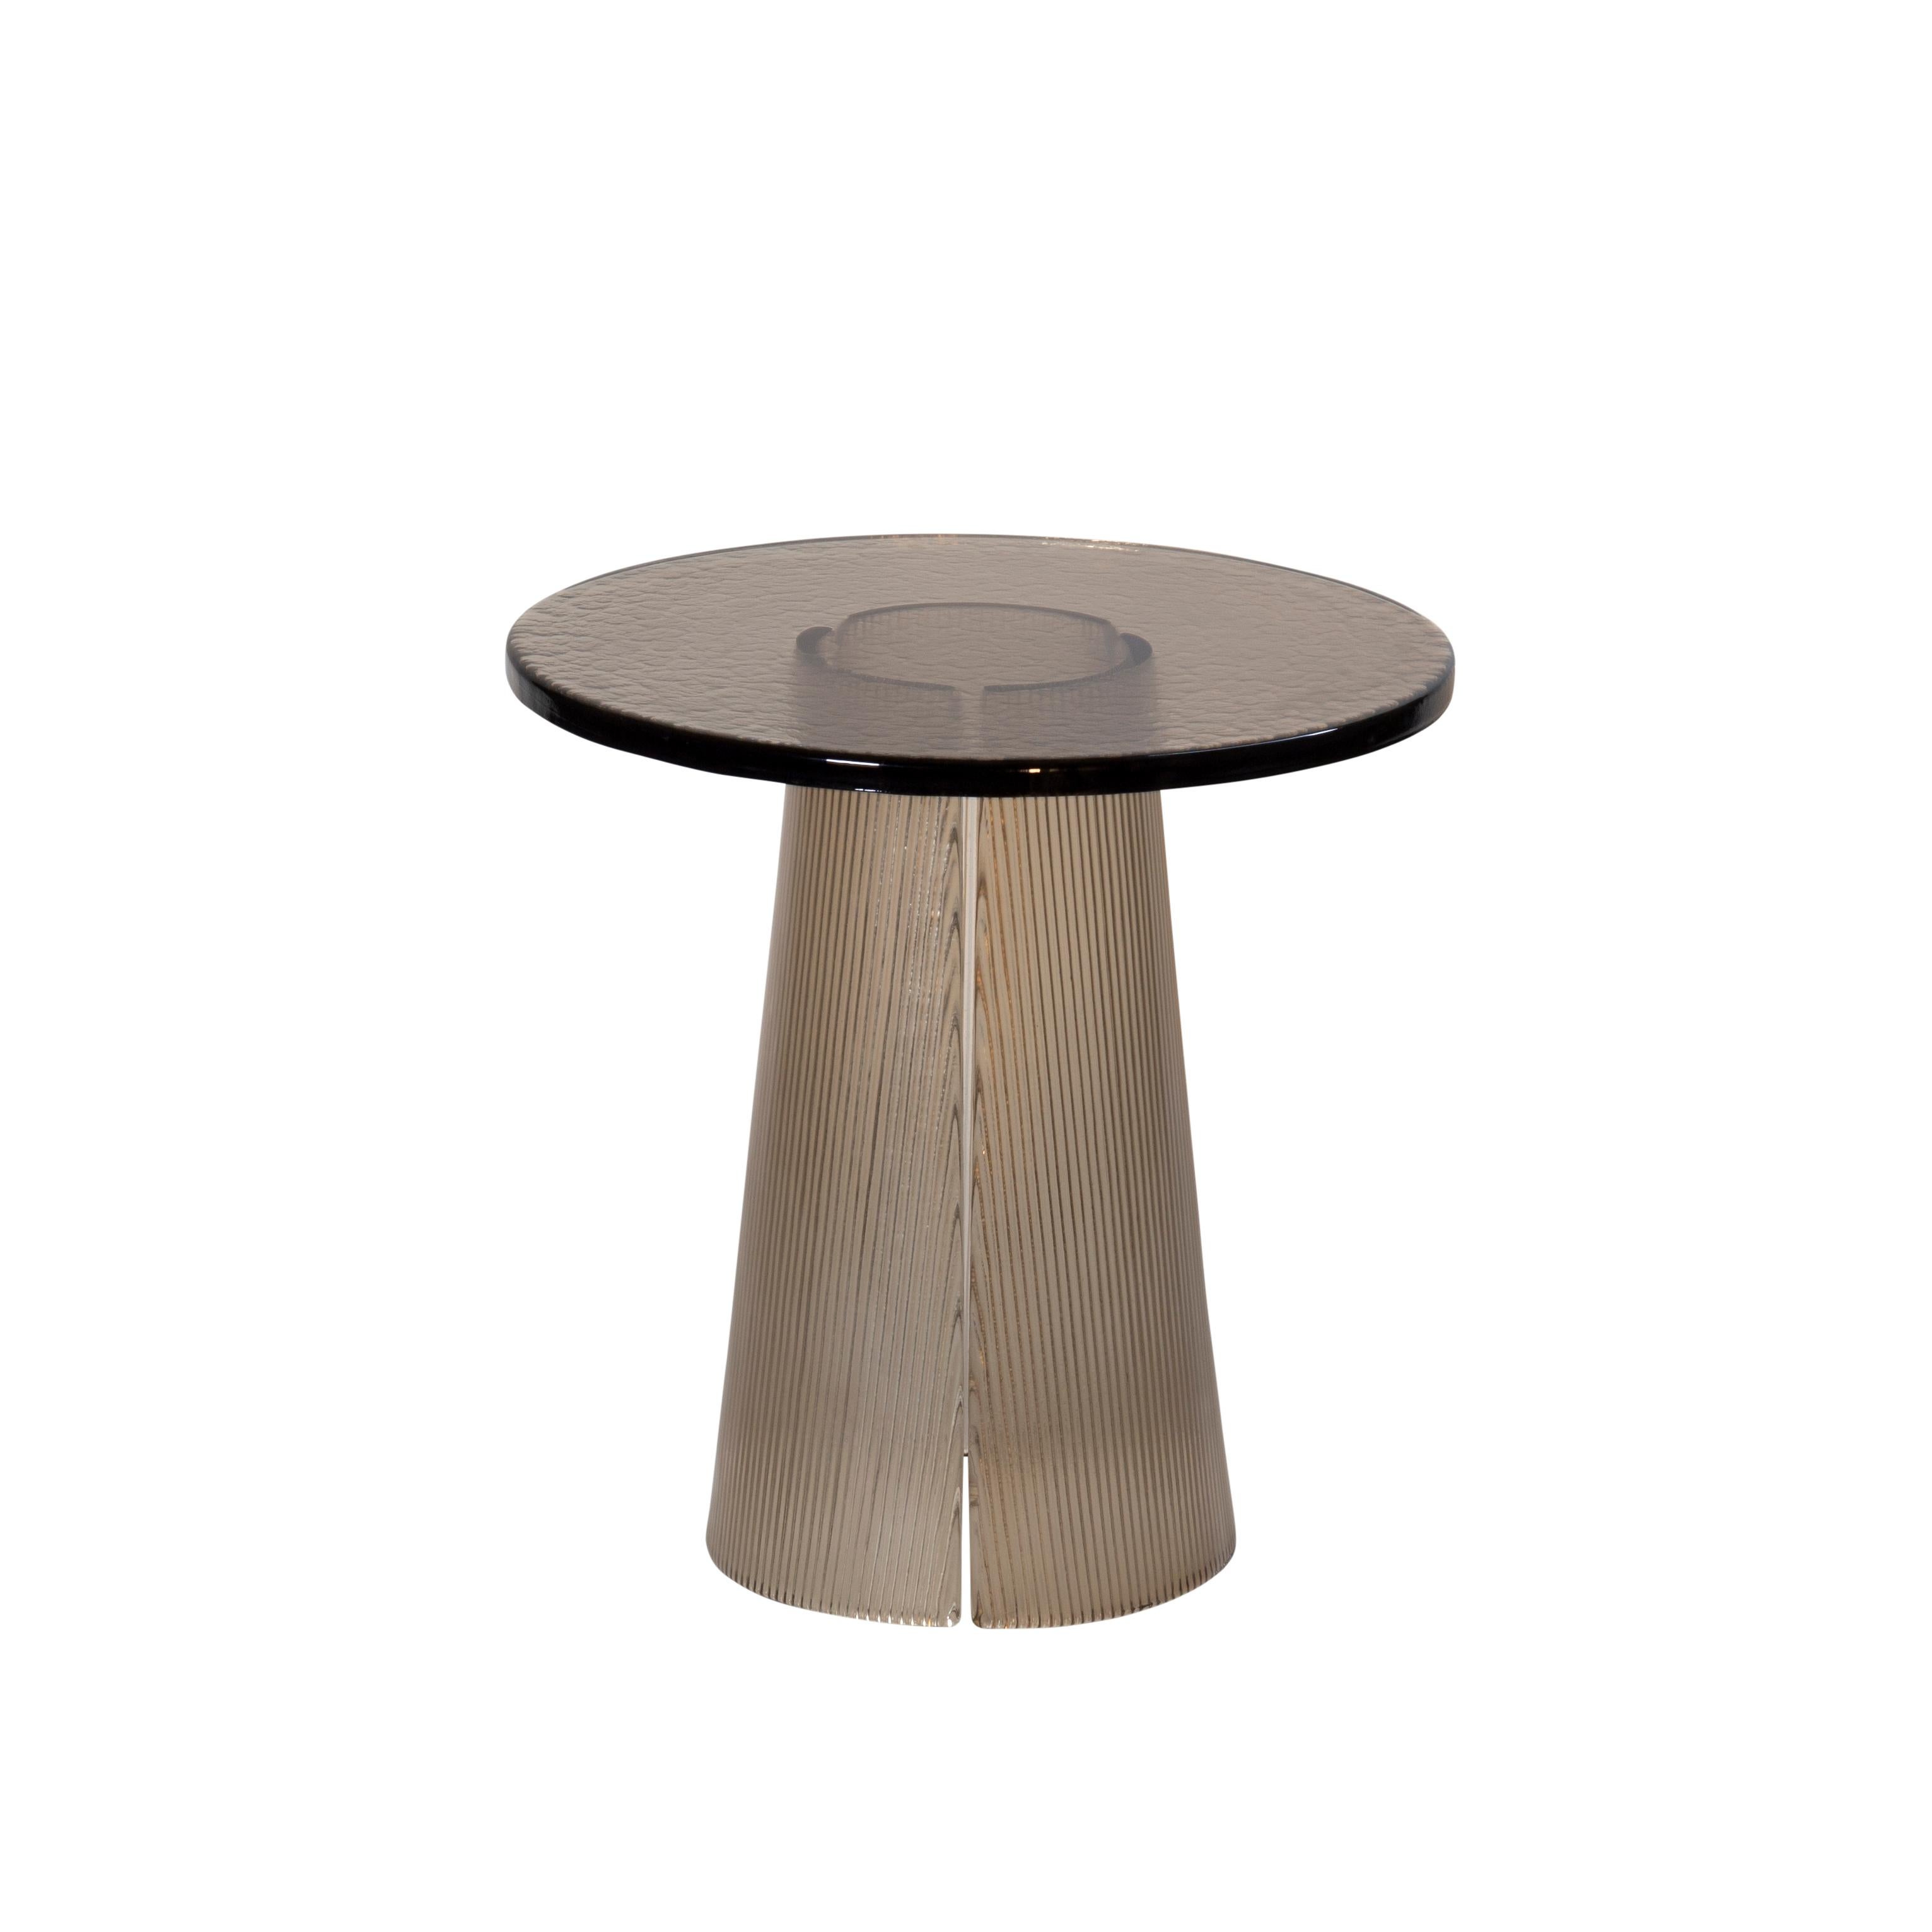 Bent side table high smoky grey by Pulpo.
Dimensions: D50 x H51.5 cm.
Materials: casted glass.

Also available in different finishes and dimensions. 

The bubbled surface of the cast glass table top dances against with the smooth lines of the fluted